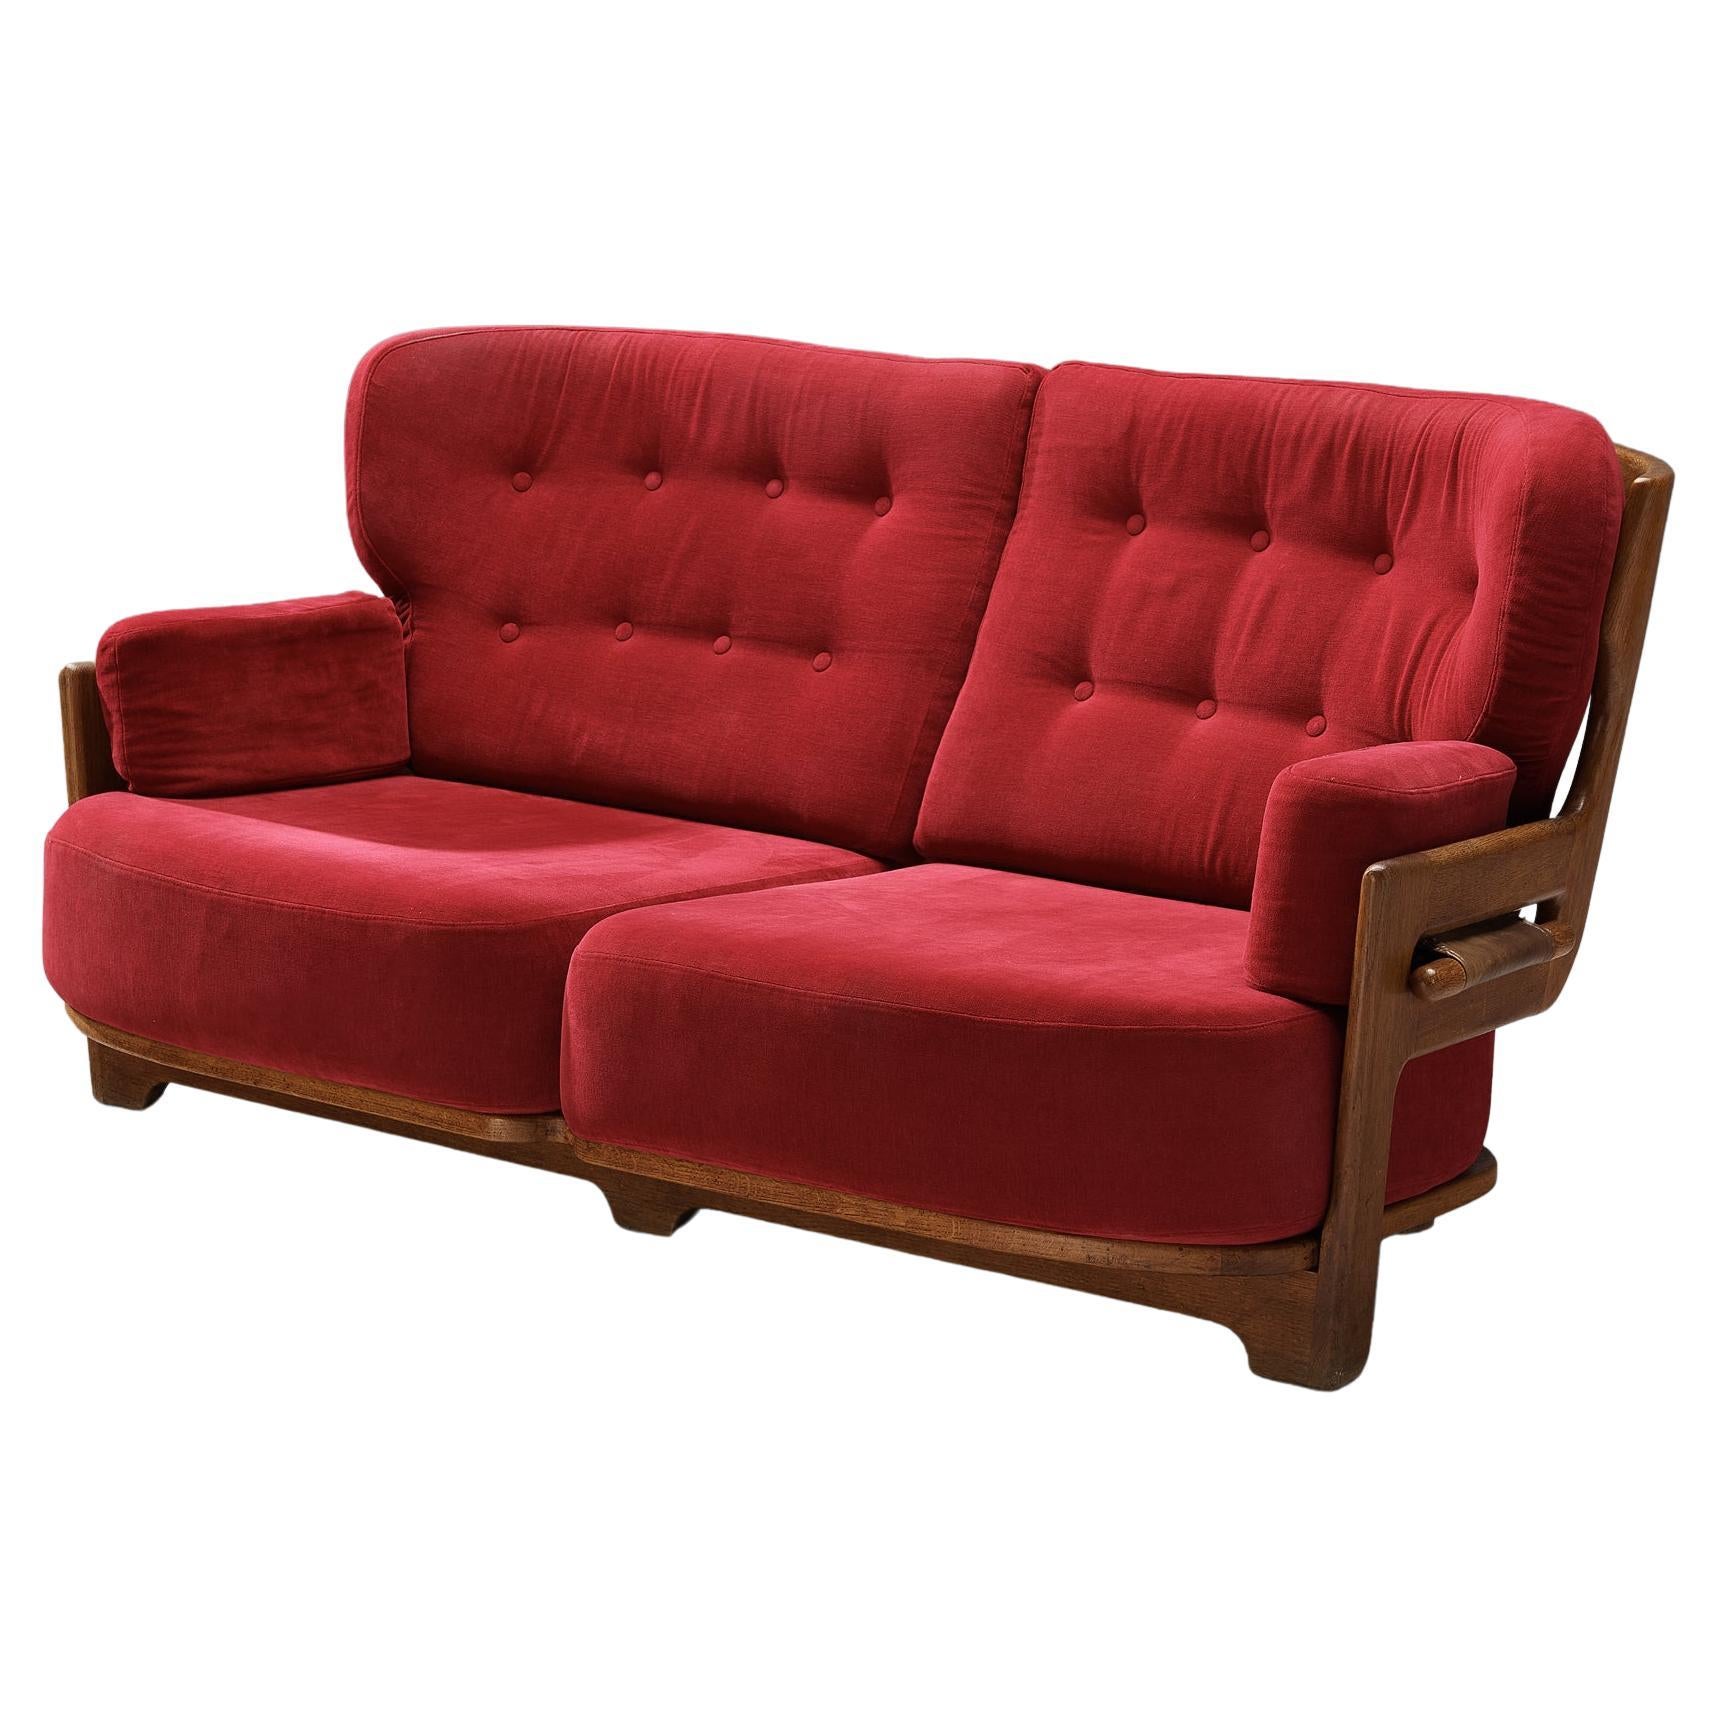 Guillerme & Chambron Sofa 'Denis' in Solid Oak and Red Velvet For Sale